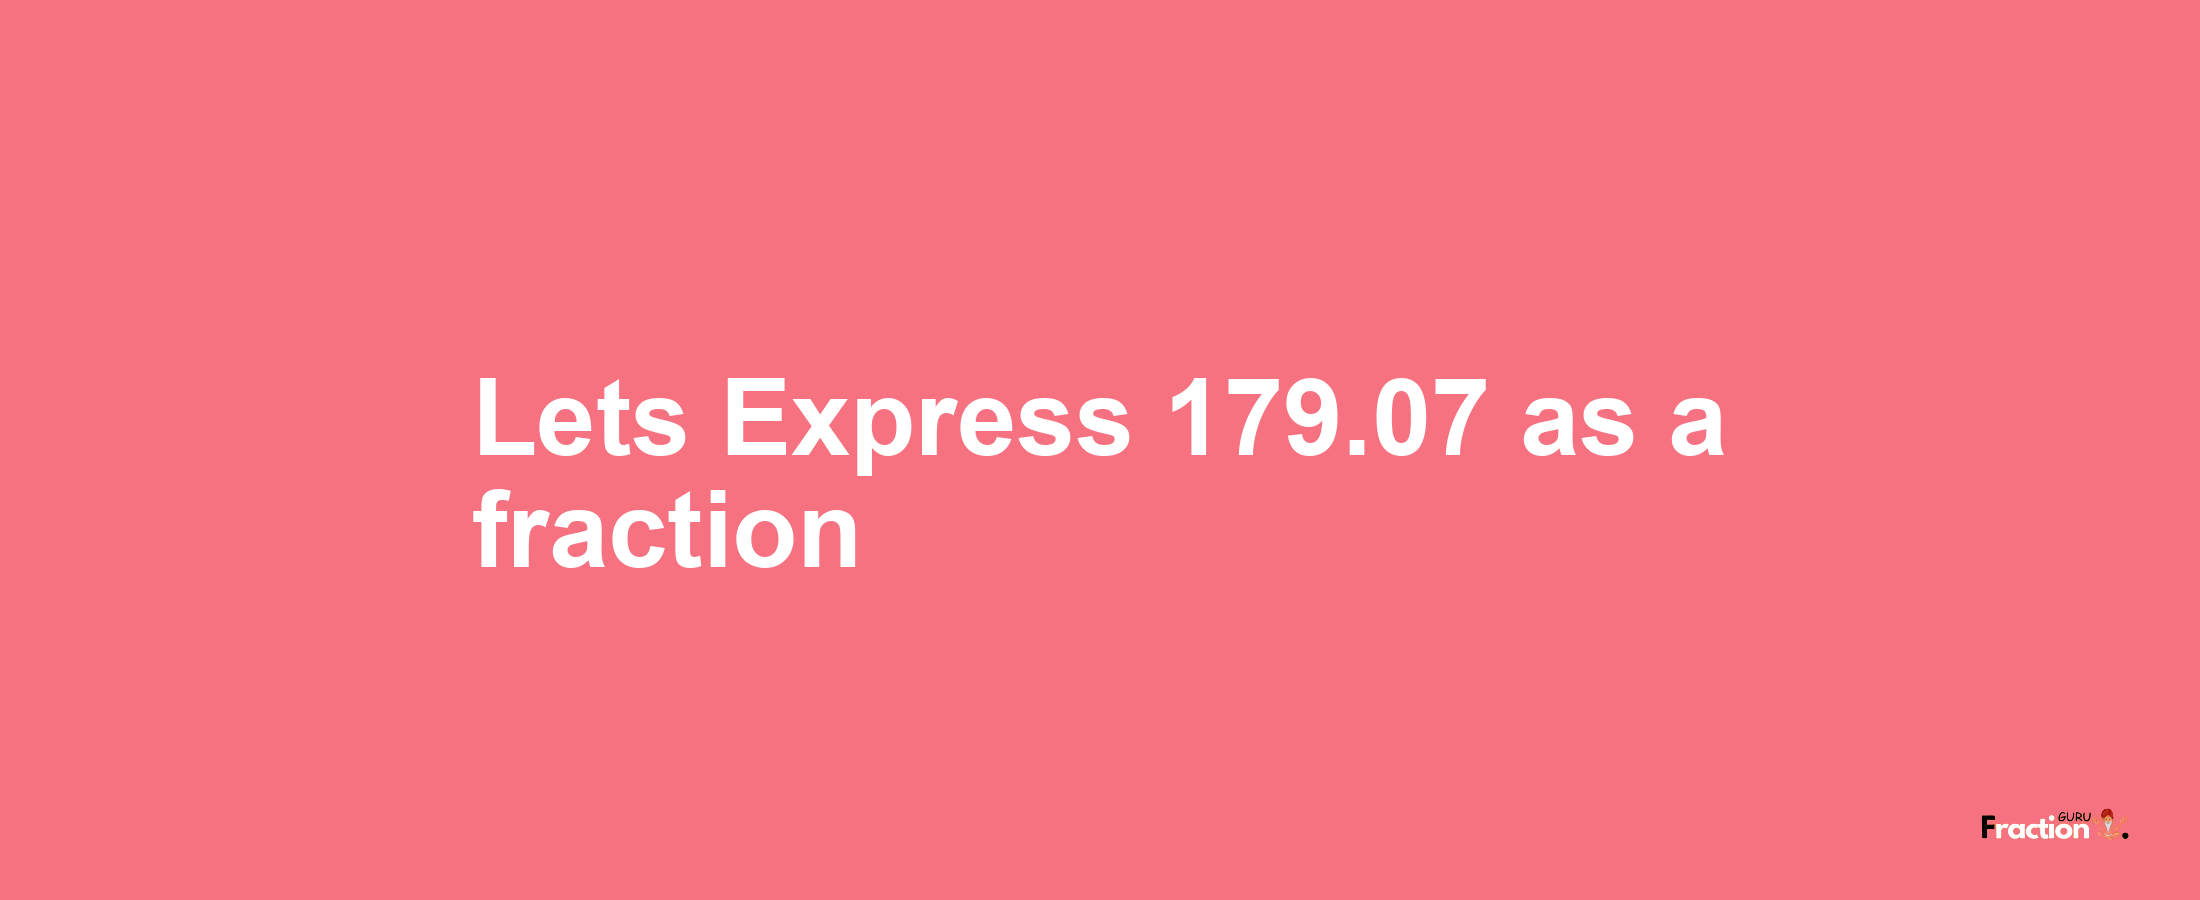 Lets Express 179.07 as afraction